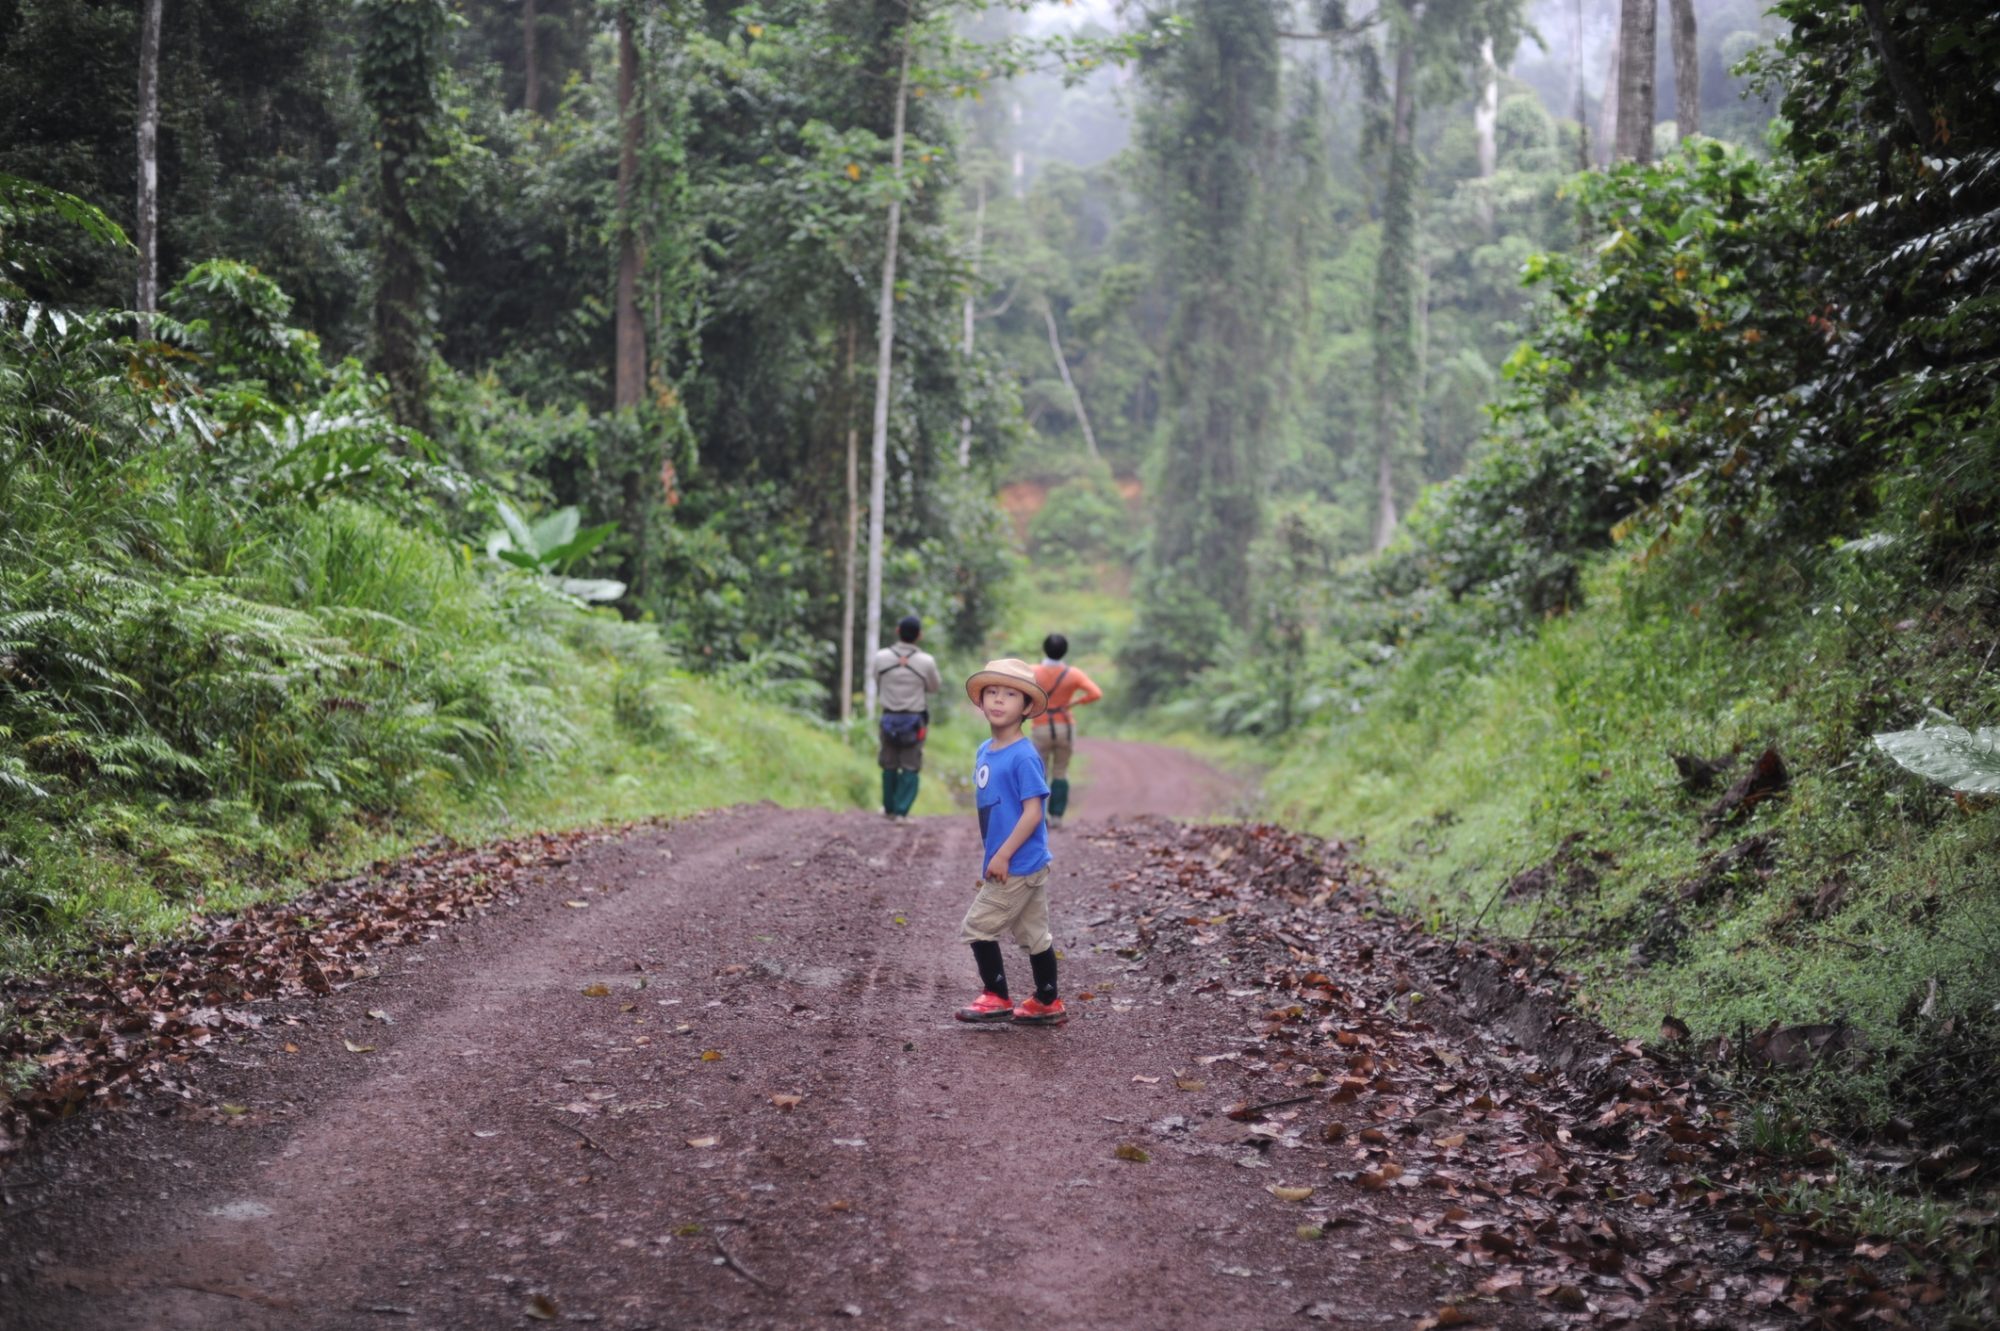 Young people walking in a tropical forest in Danum Valley in Borneo